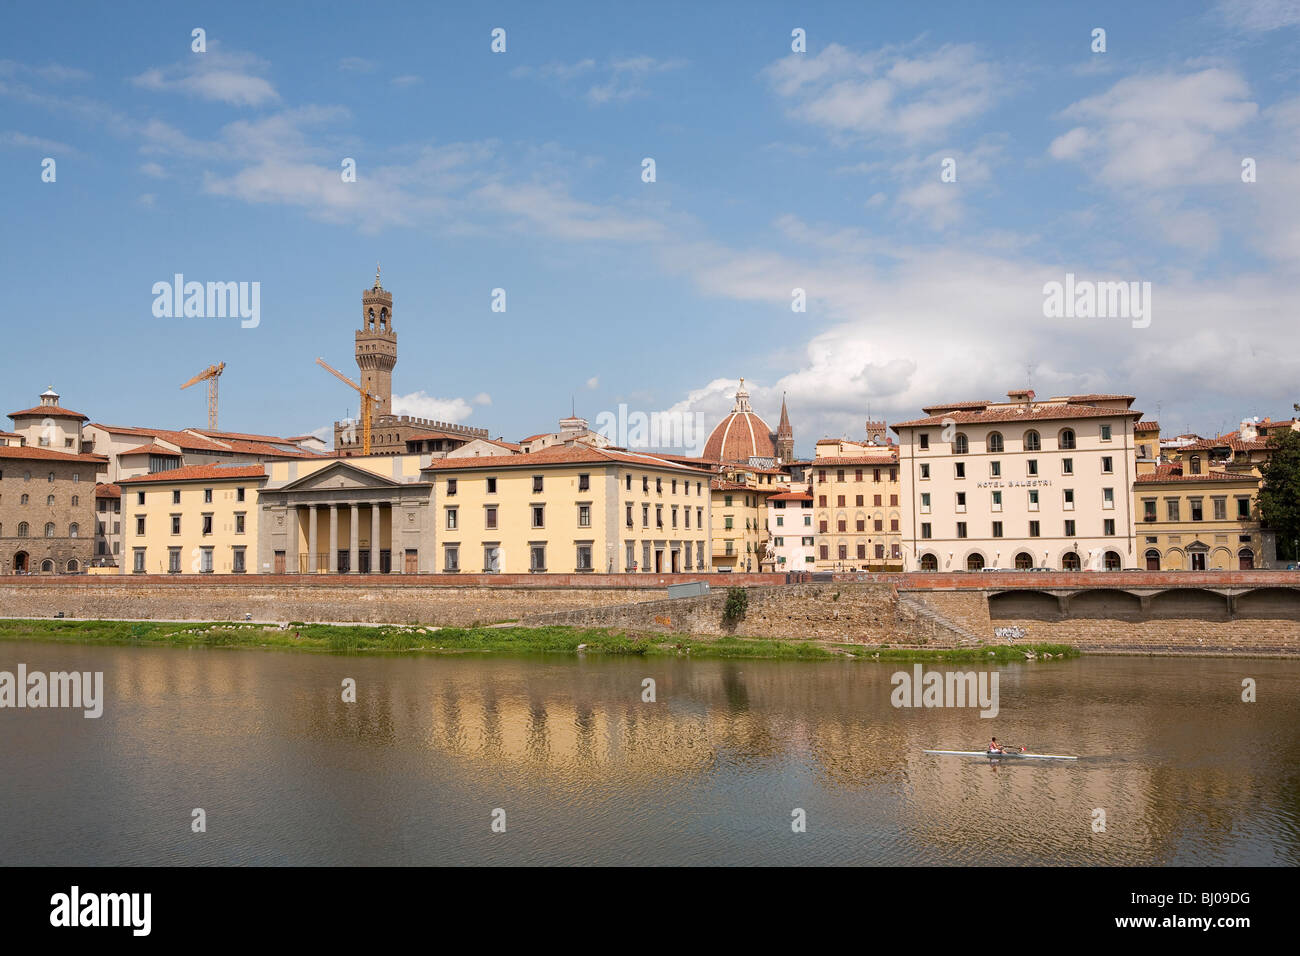 River Arno in Florence Italy with the famous medieval building the Palazzo Vecchio and Santa Maria del Fiore or Il Duomo Stock Photo